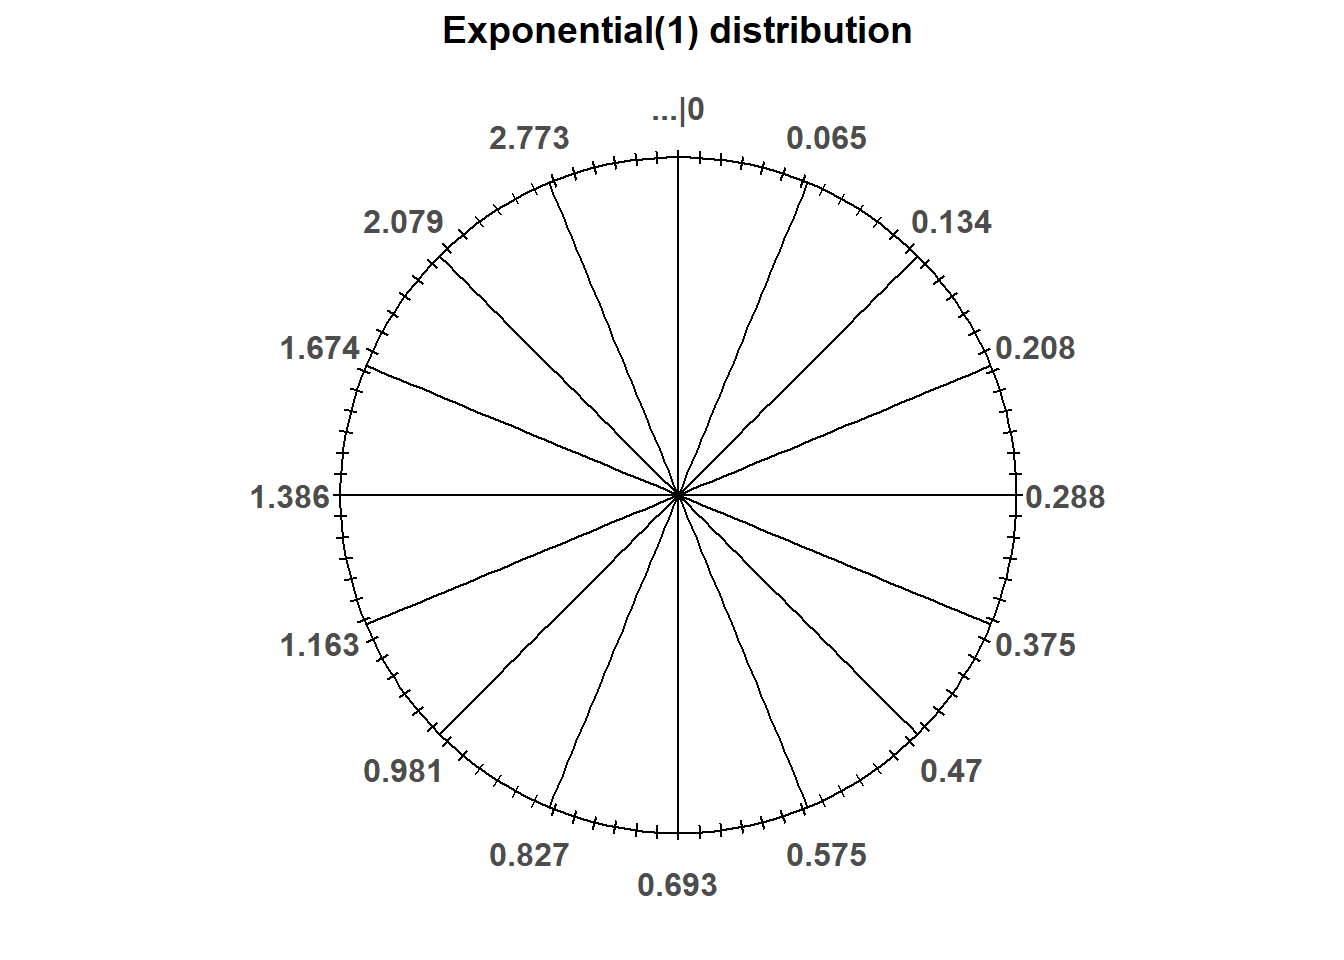 An Exponential(1) spinner. The same spinner is displayed on both sides, with different features highlighted on the left and right. Only selected rounded values are displayed, but in the idealized model the spinner is infinitely precise so that any real number greater than 0 is possible. Notice that the values on the axis are not evenly spaced.